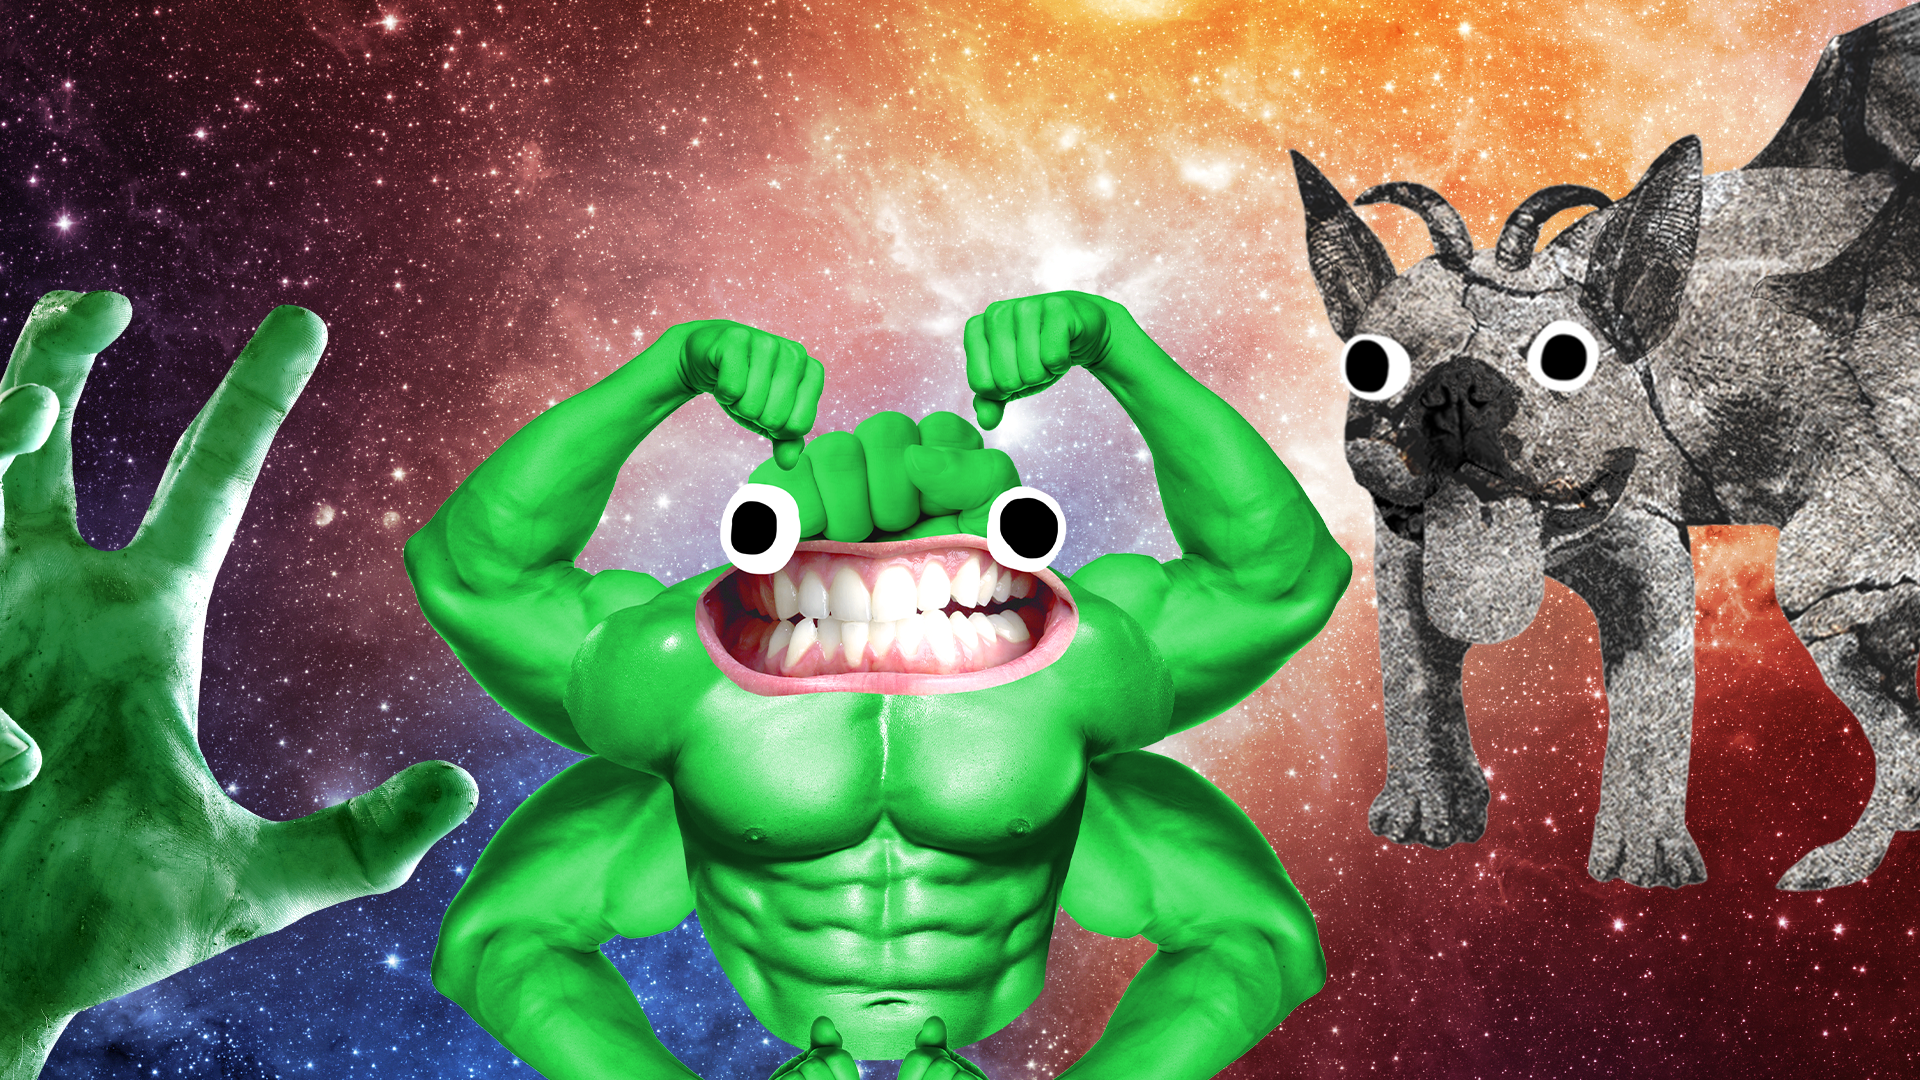 Beano monsters on starry background